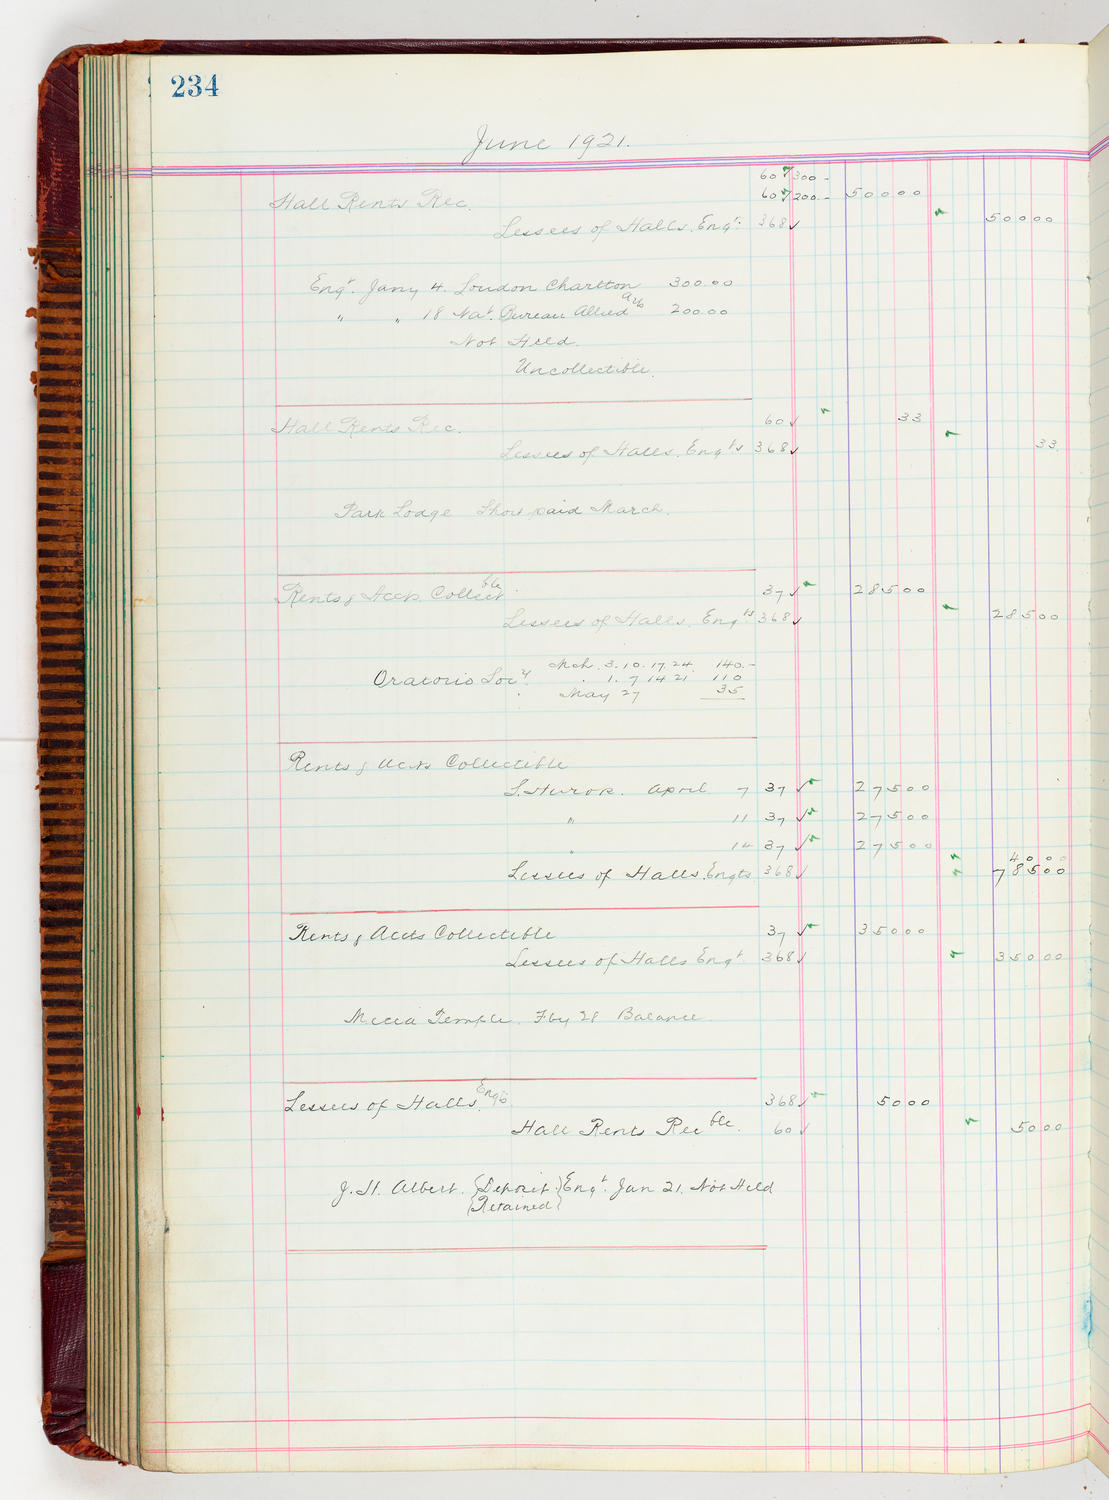 Music Hall Accounting Ledger, volume 5, page 234